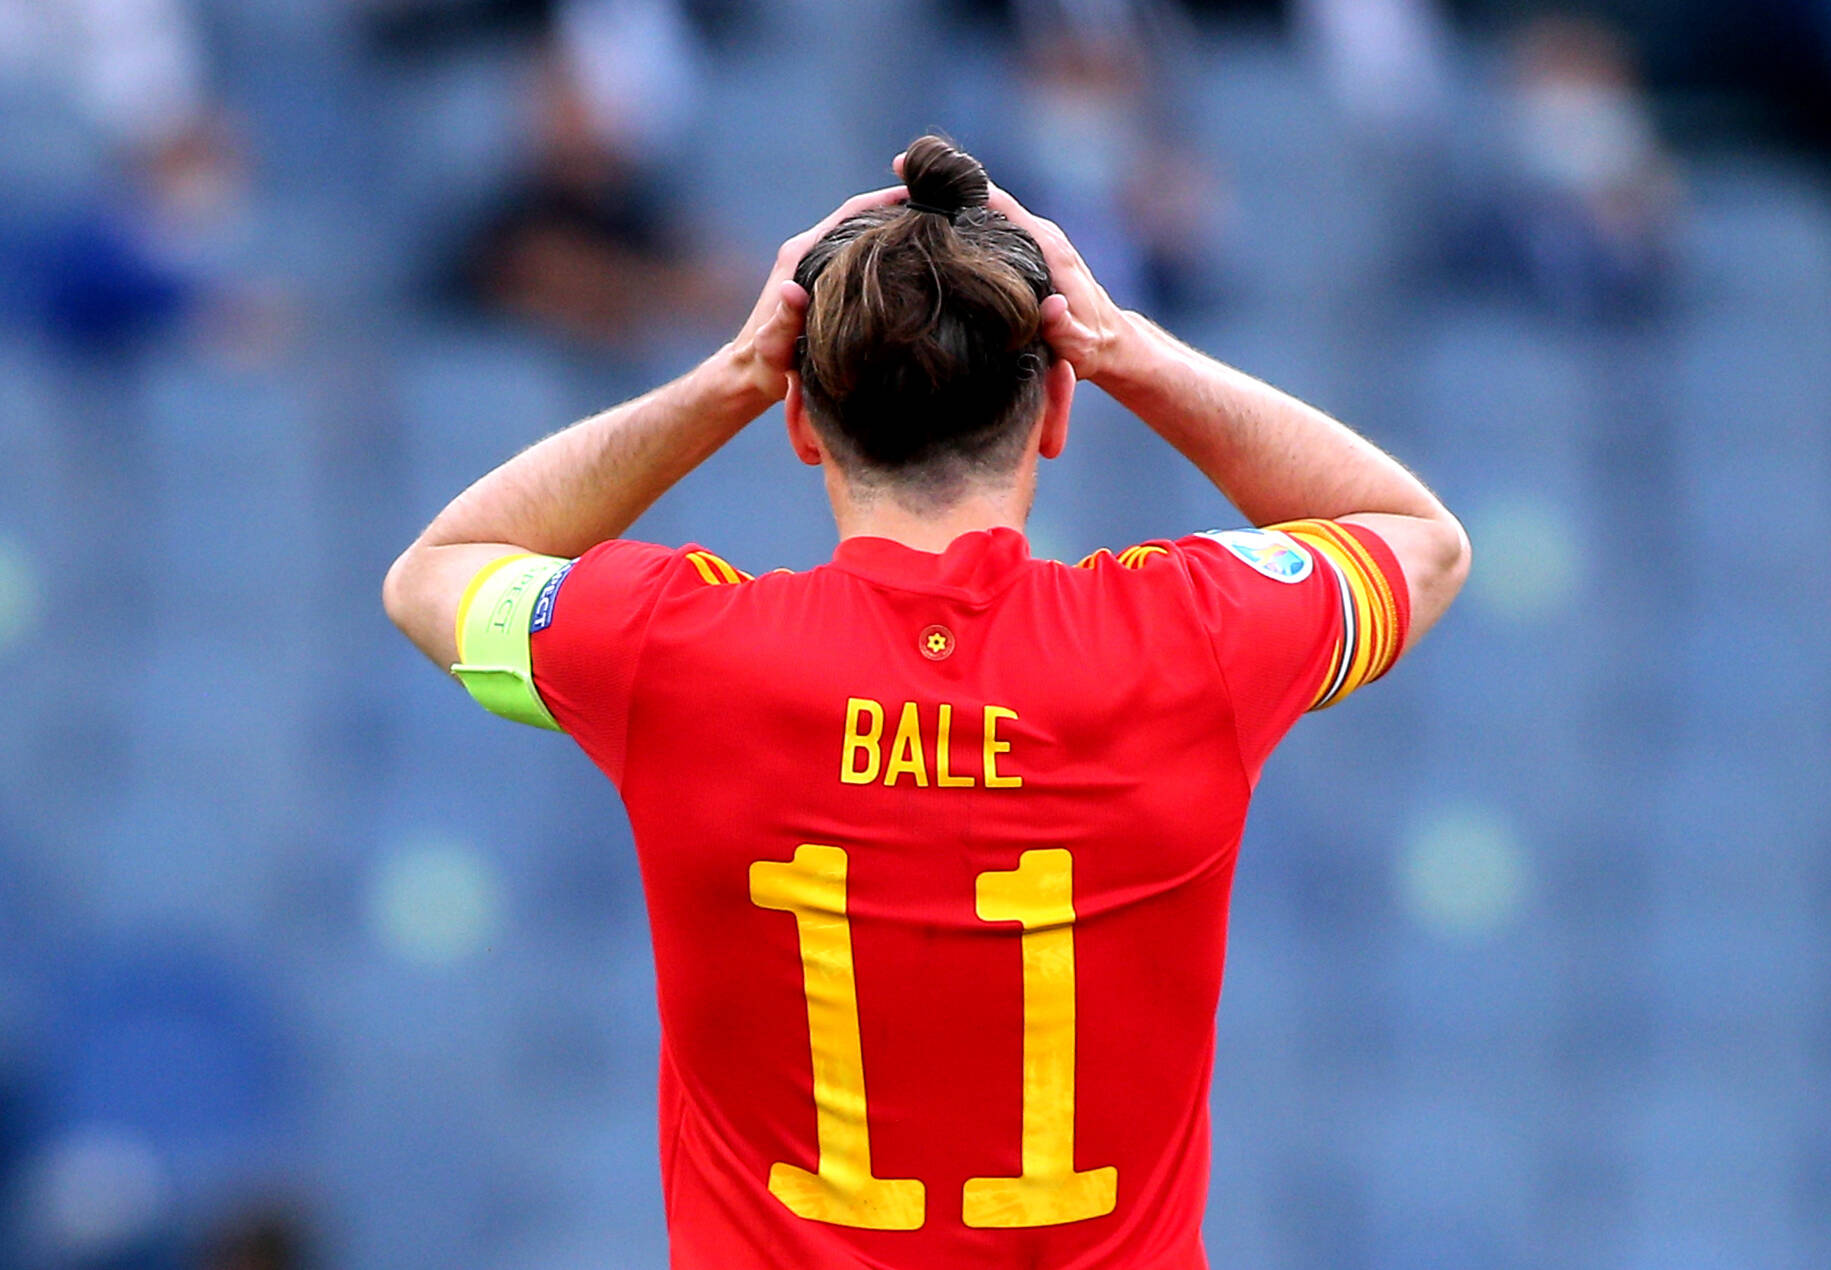 Gareth Bale is to wear the number - Kampala Jersey store